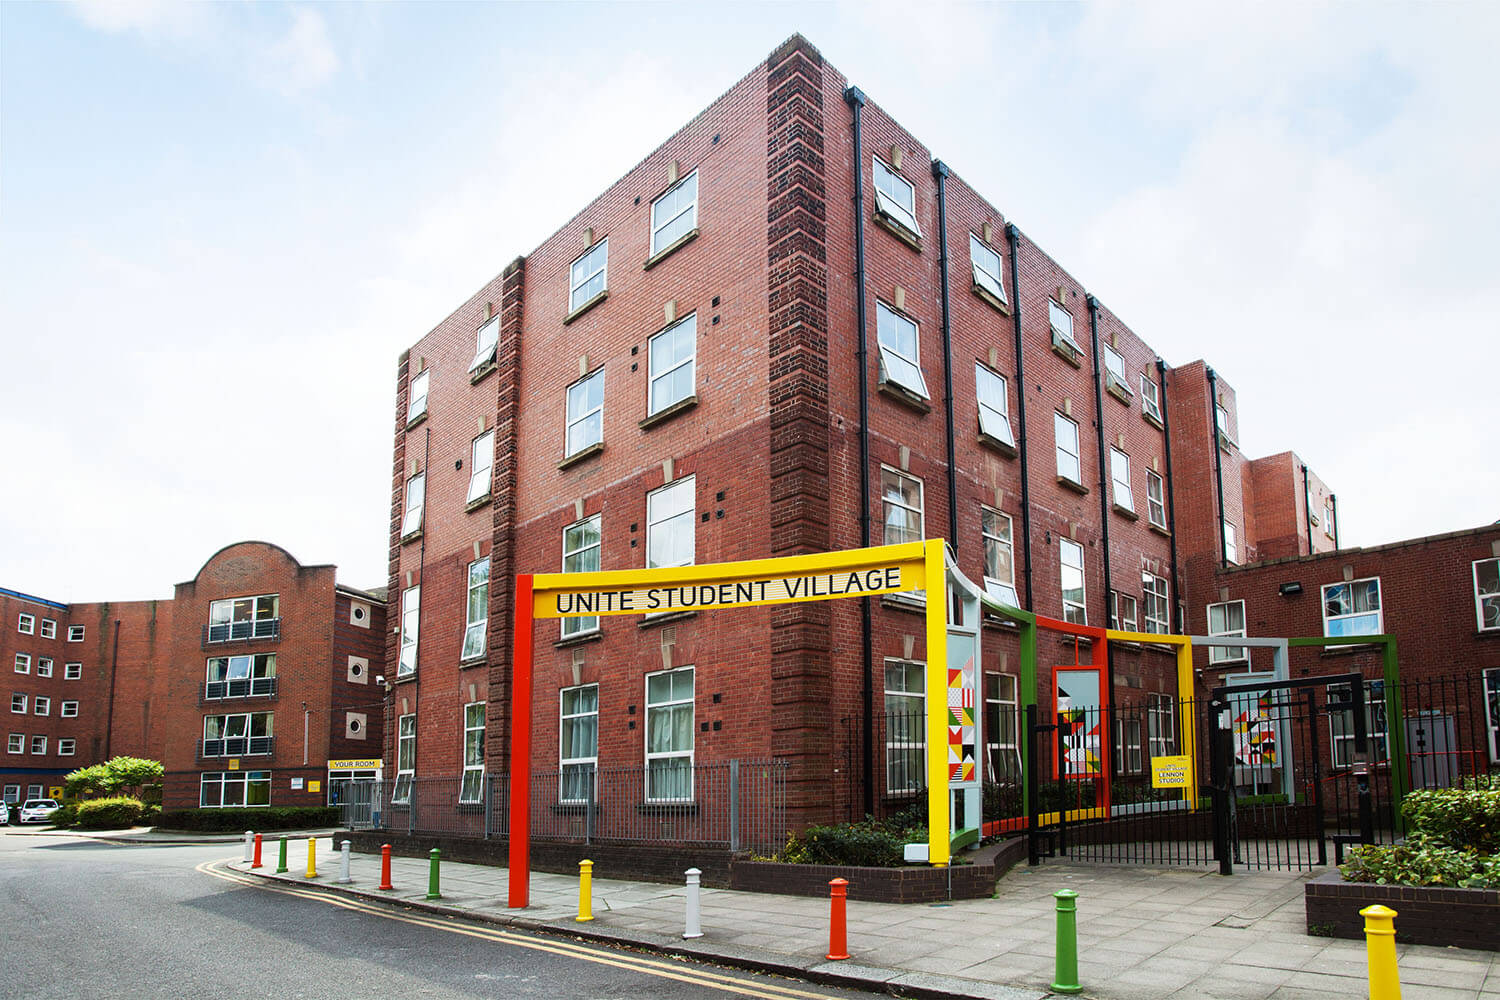 Student Village entrance in Liverpool